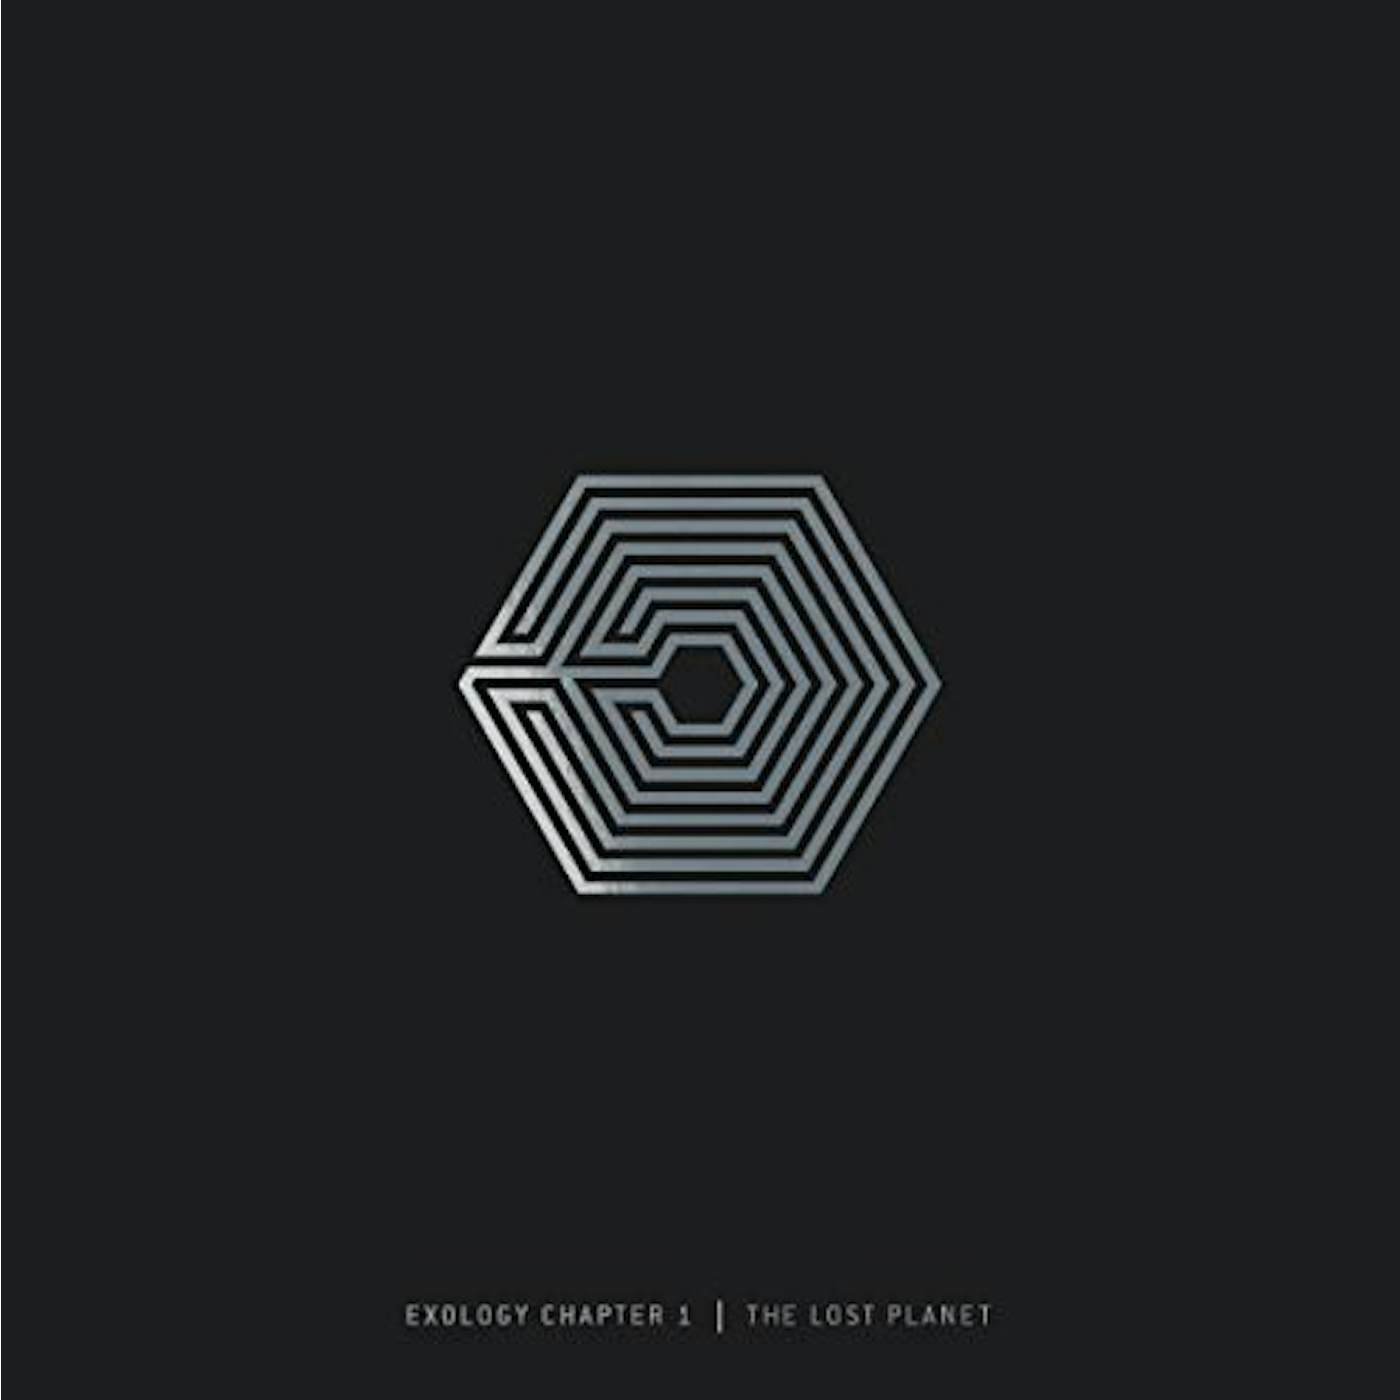 EXOLOGY CHAPTER 1 : THE LOST PLANET CD